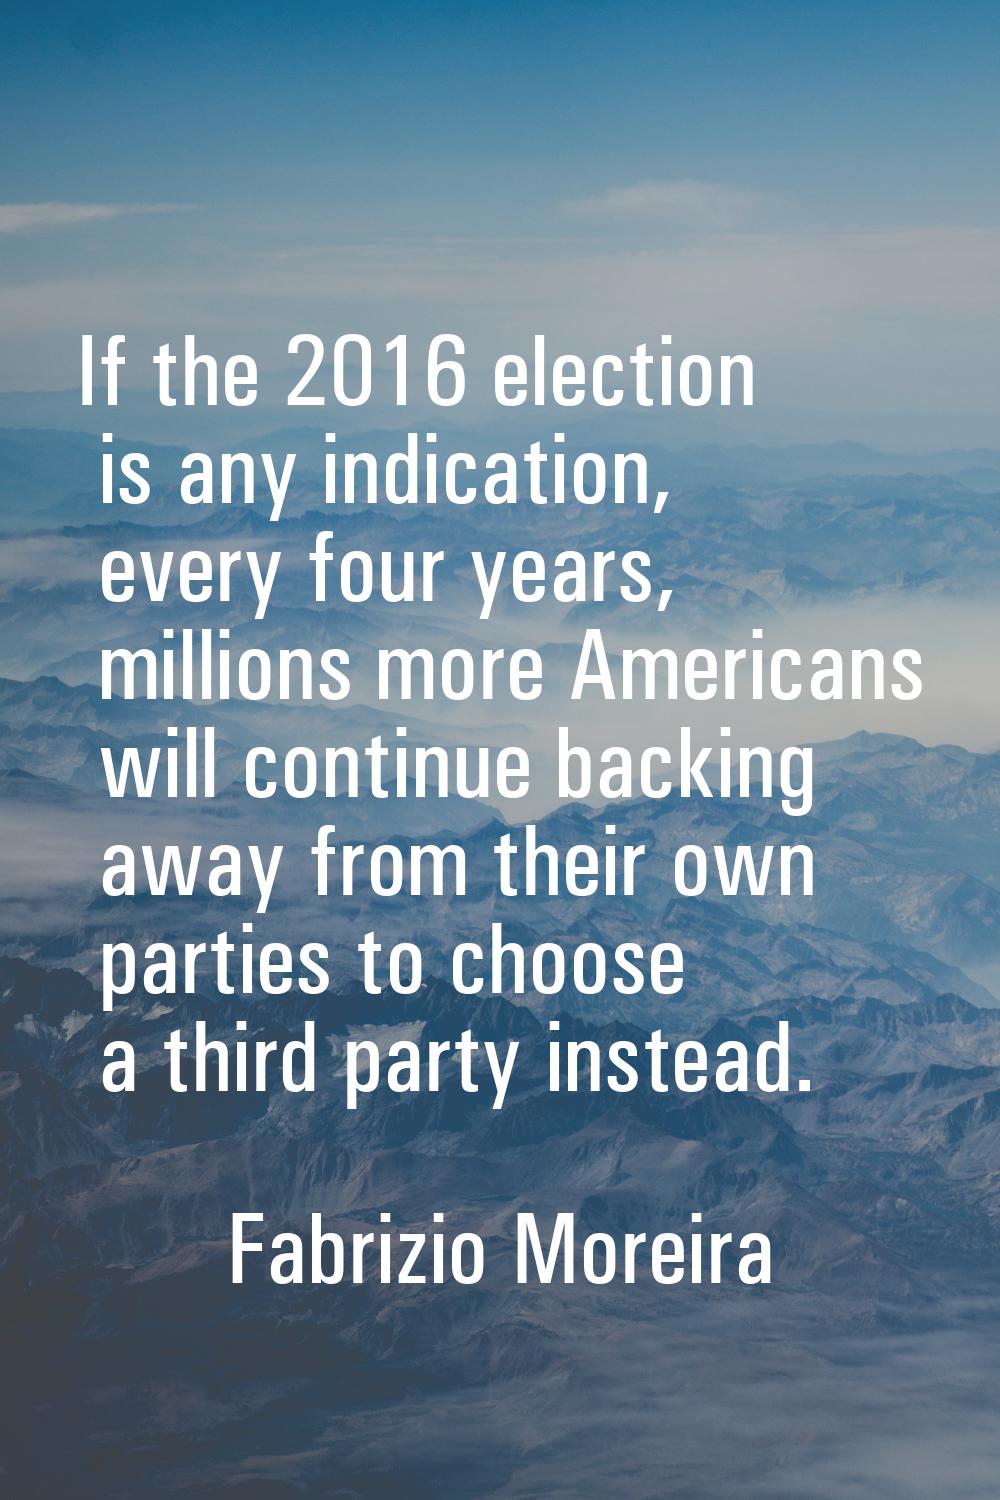 If the 2016 election is any indication, every four years, millions more Americans will continue bac